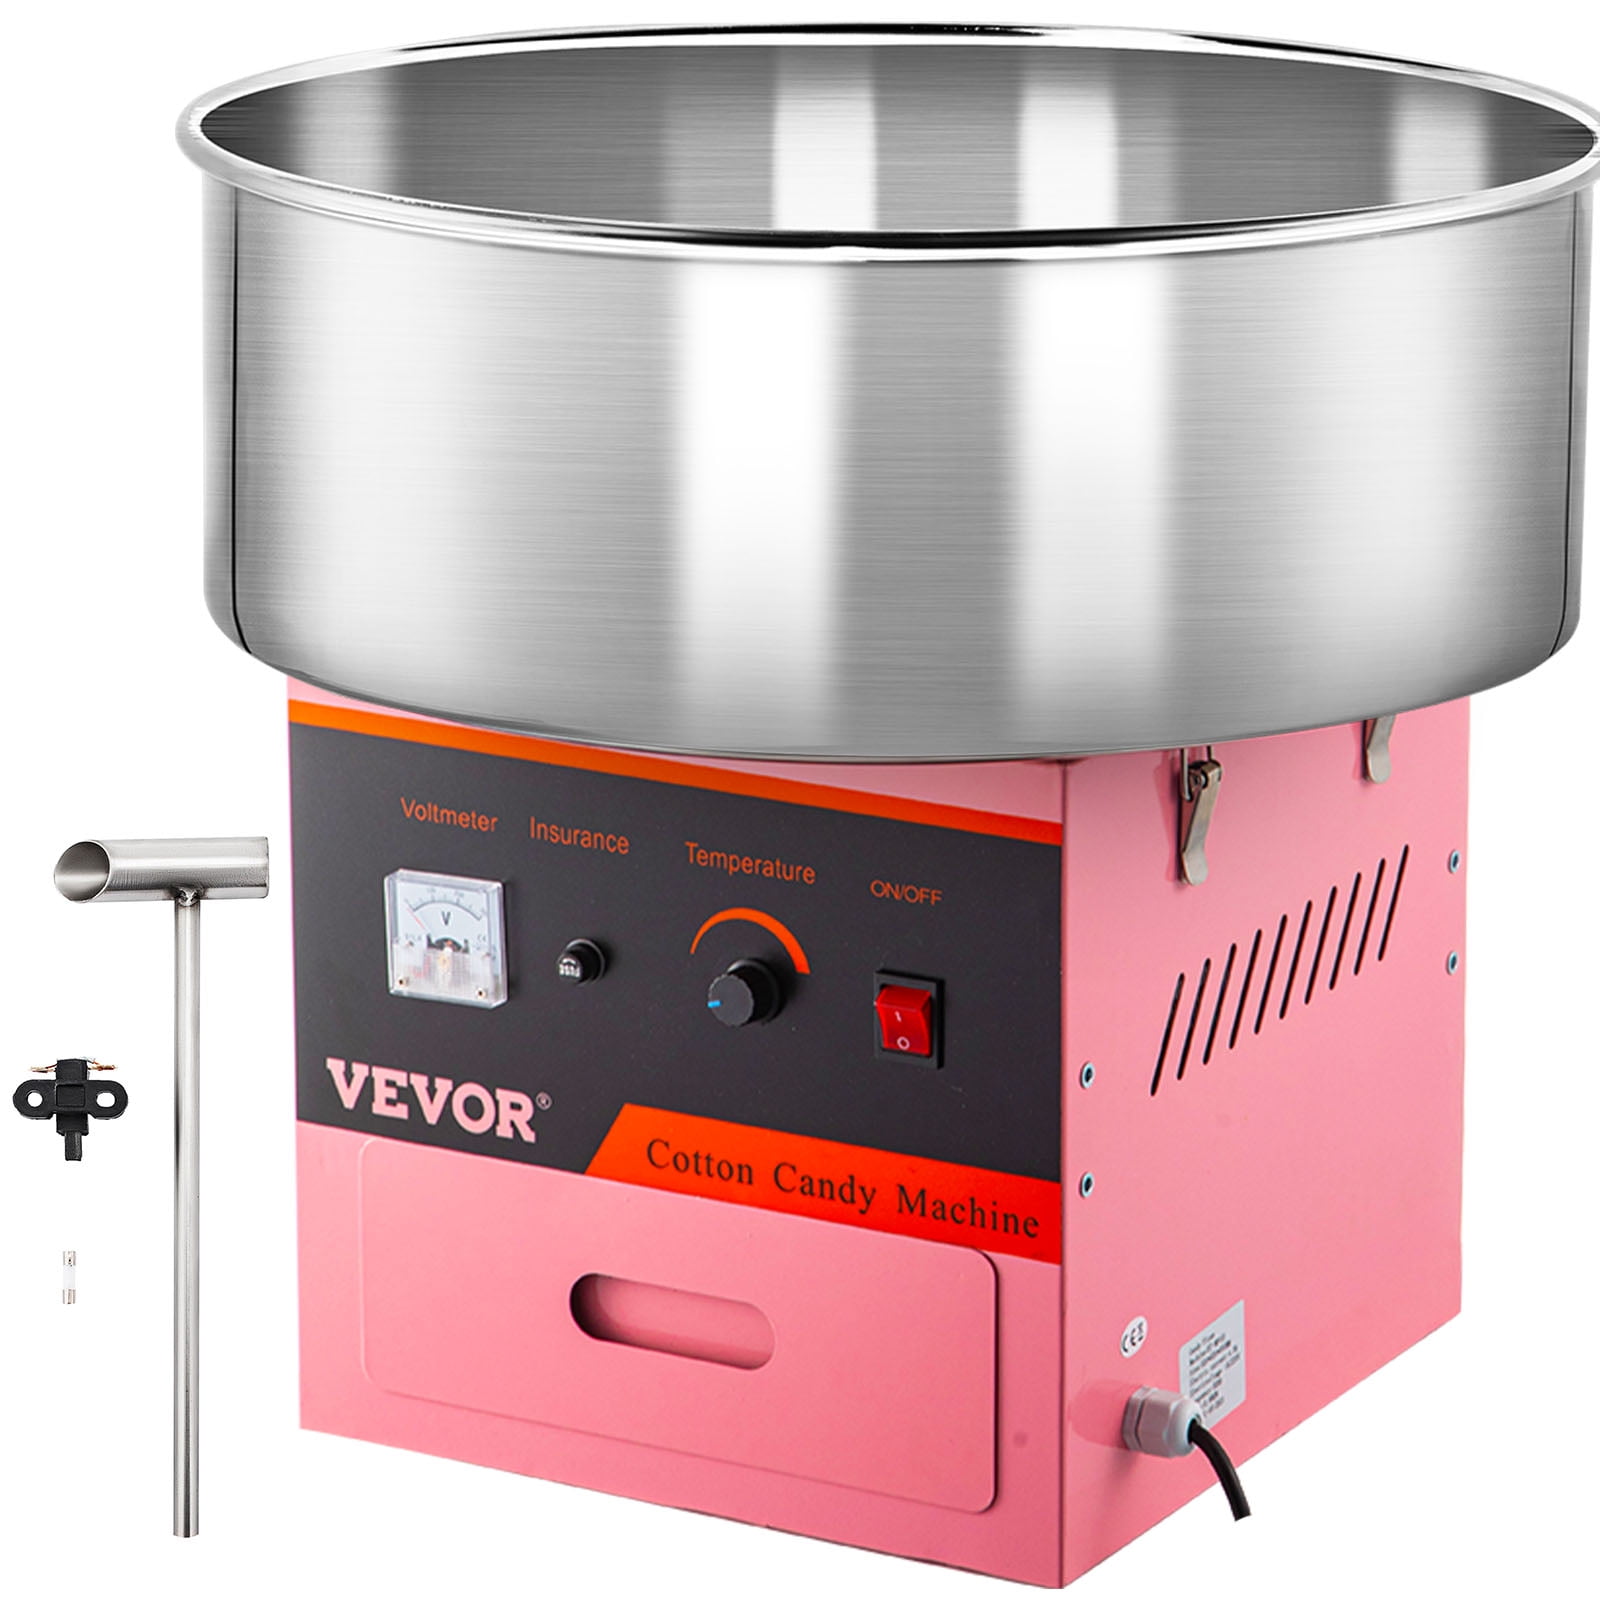 Ridgeyard Commercial 1300W Quality Cotton Candy Machine Candy Floss Maker Xmas 